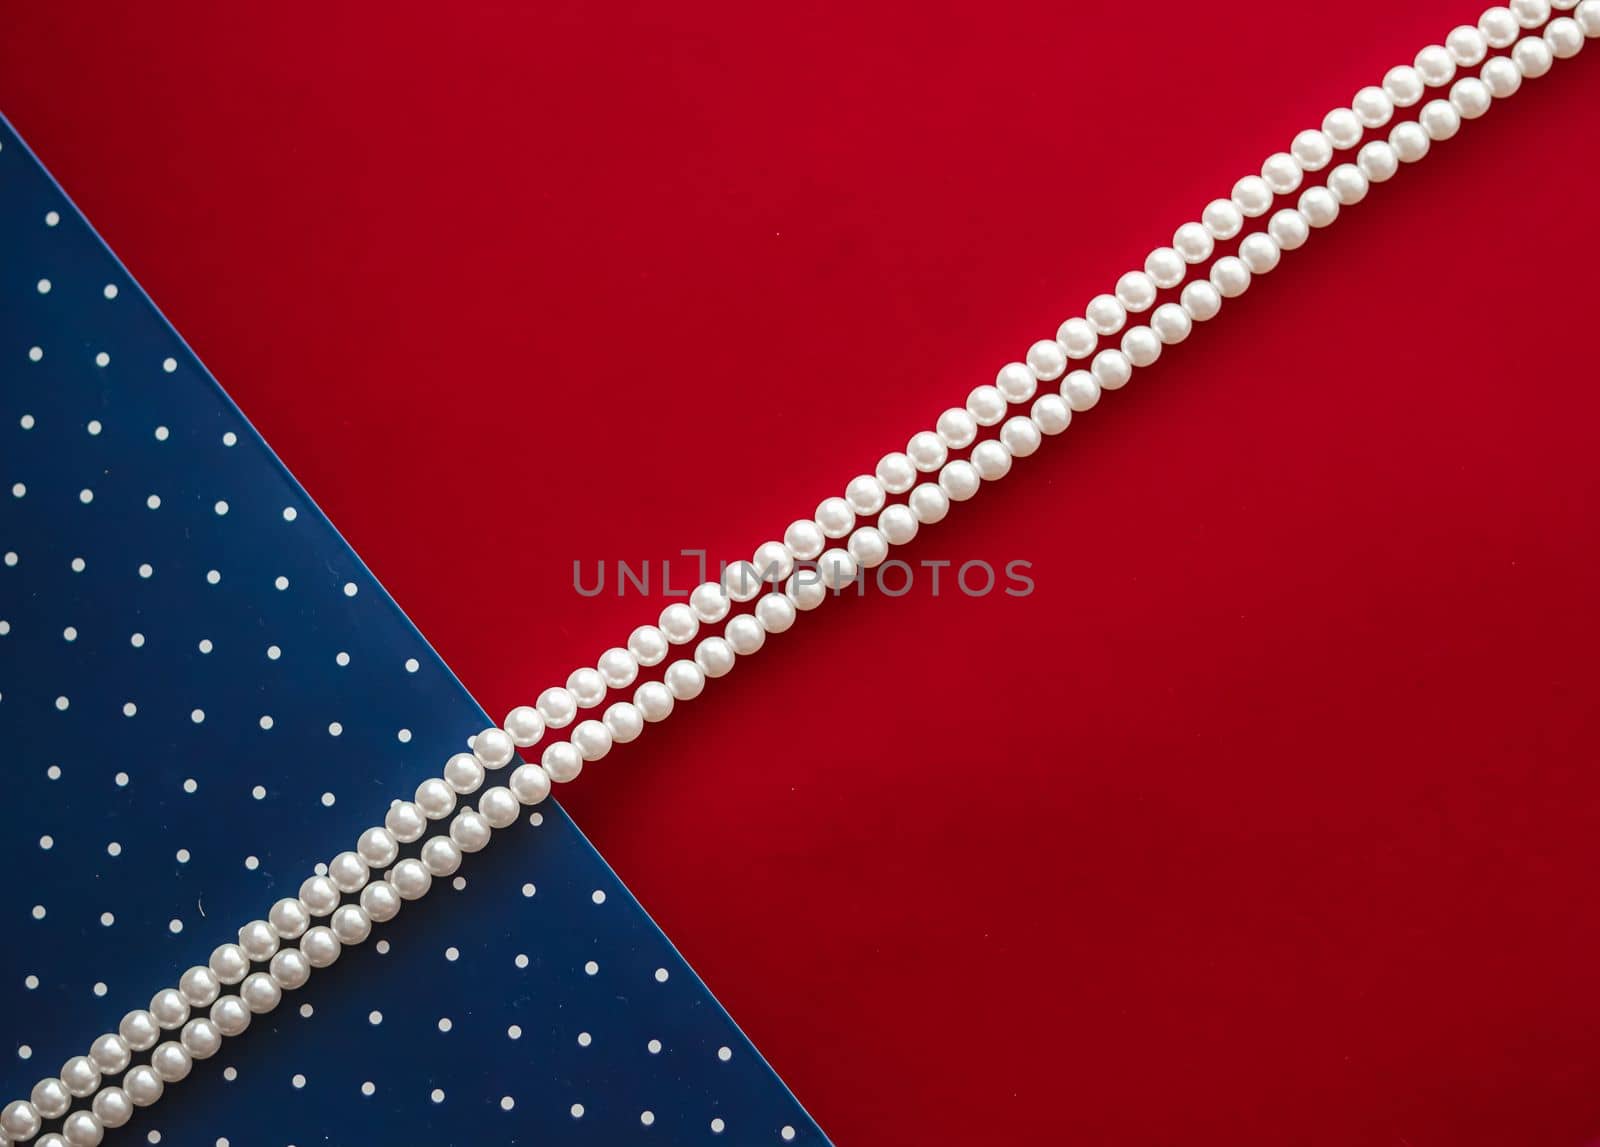 Pearl jewellery necklace and abstract blue polka dot background on red backdrop by Anneleven